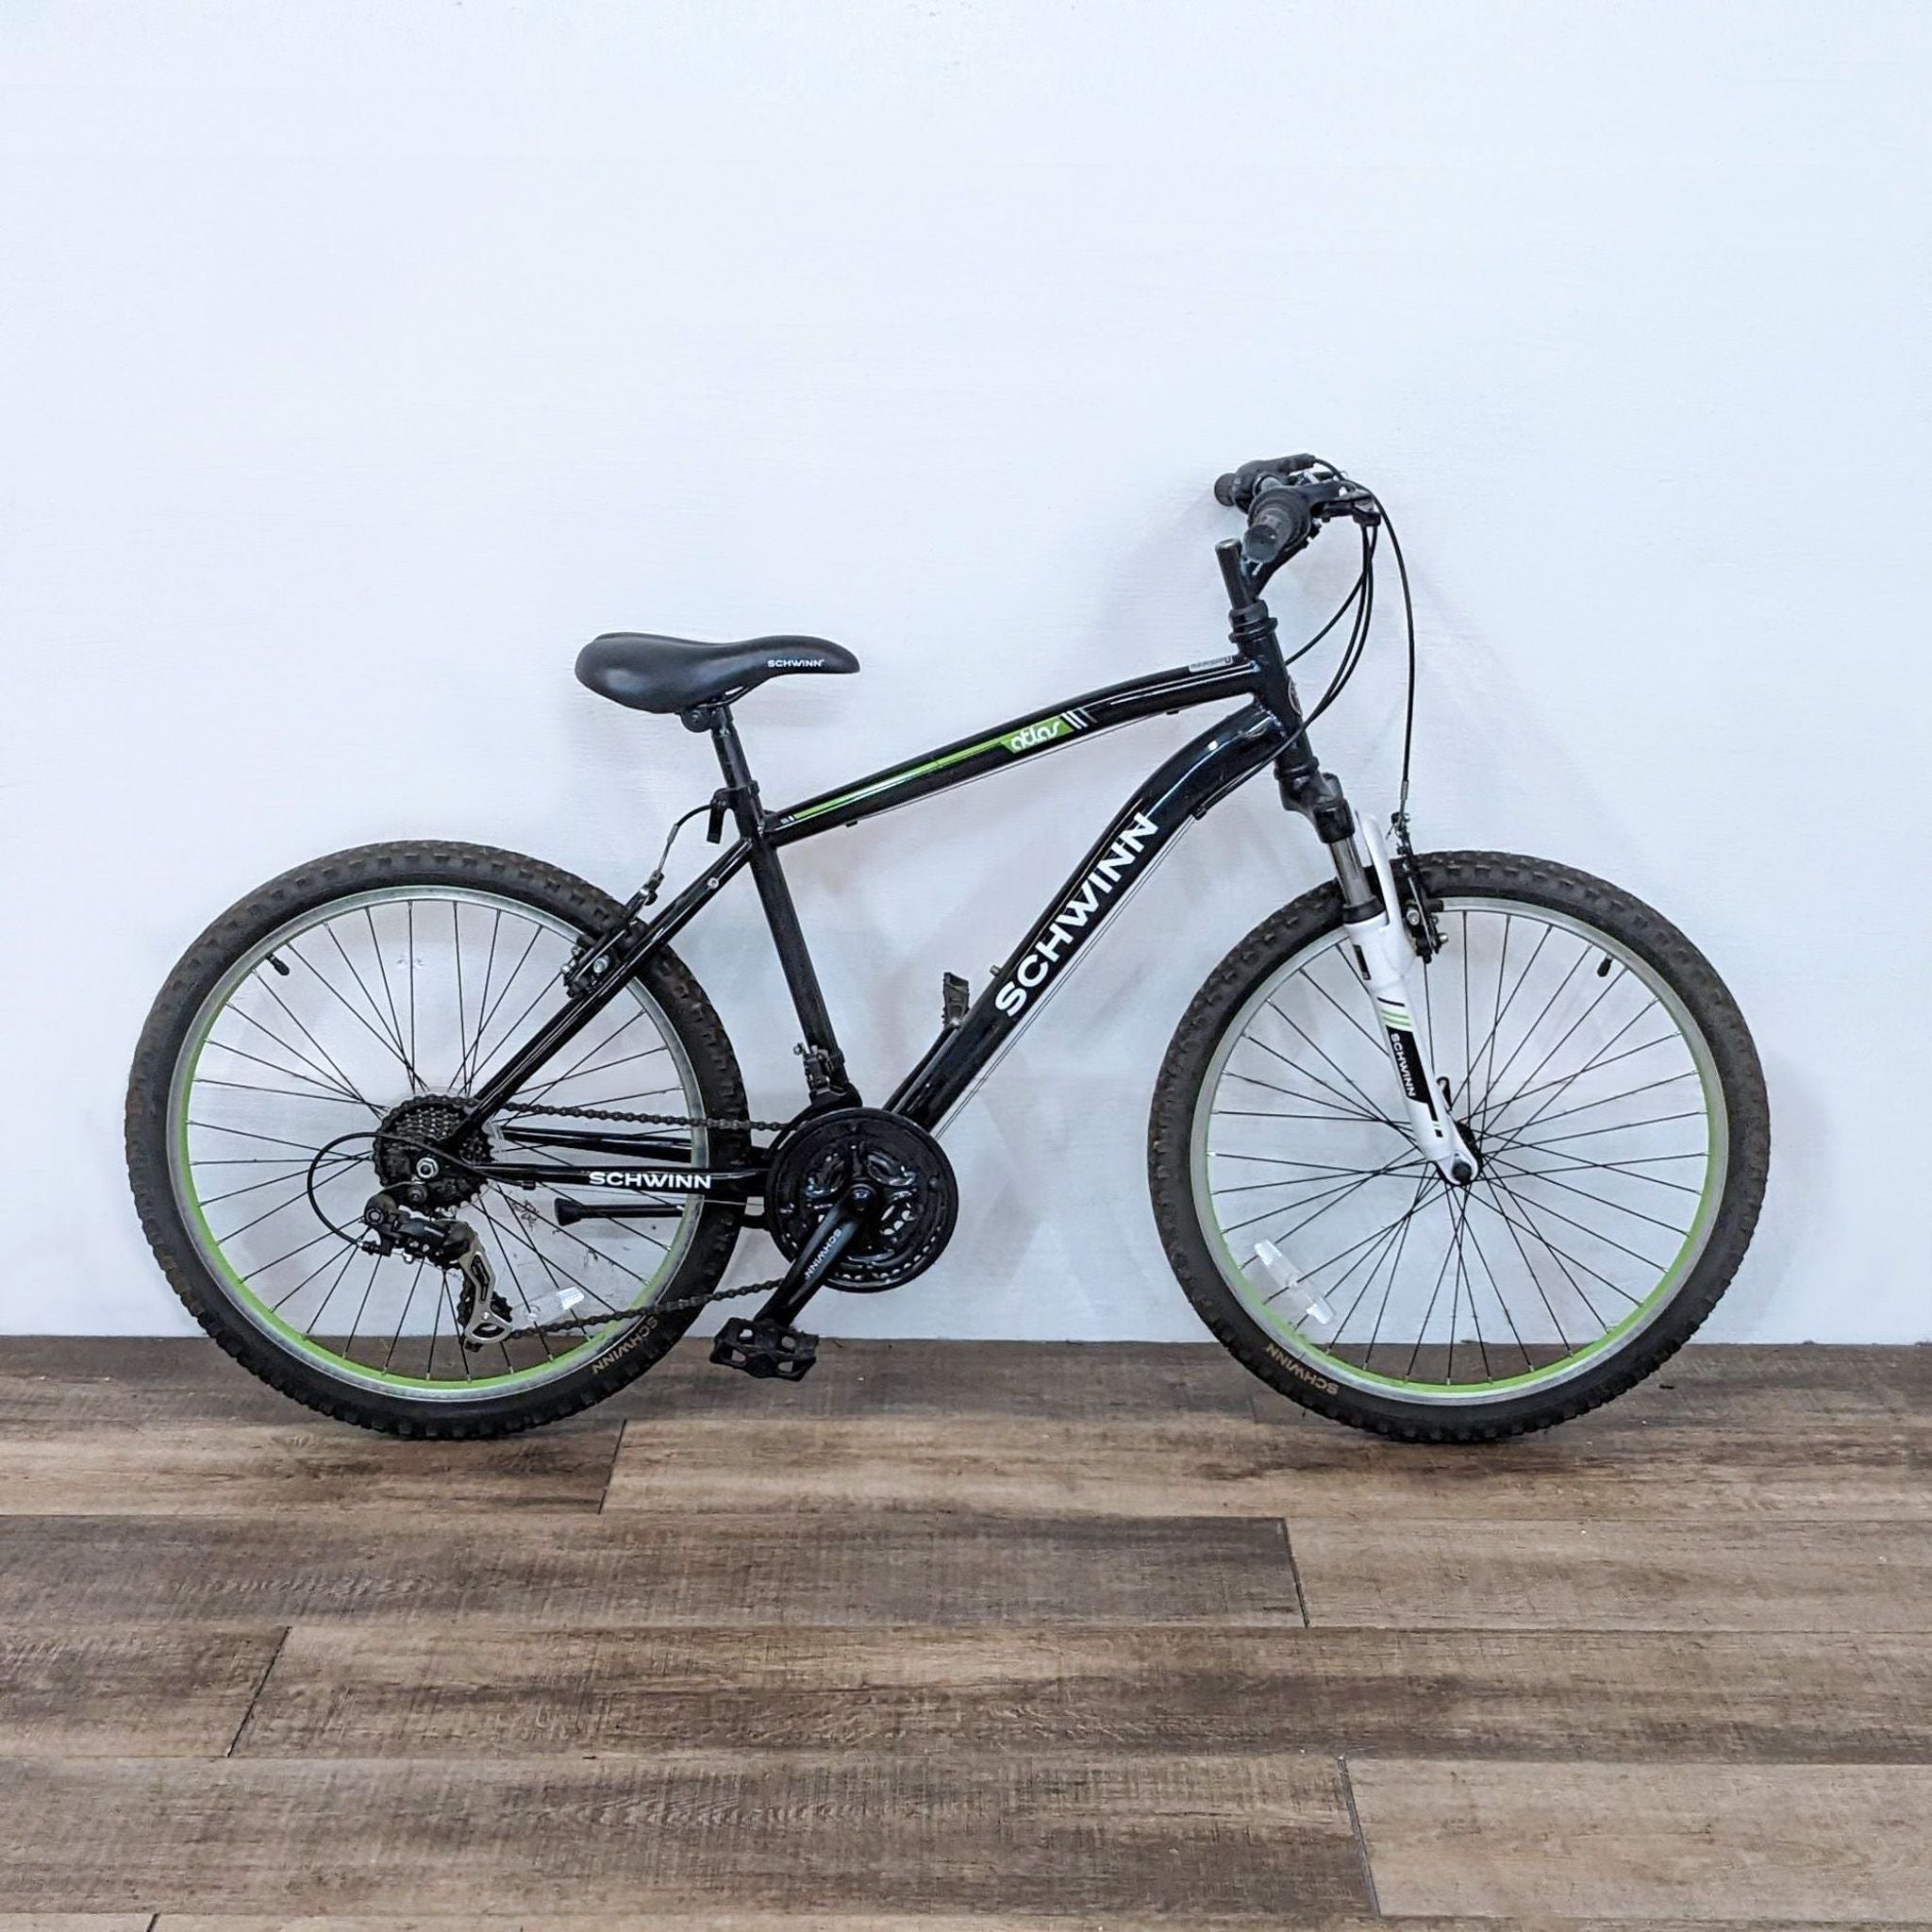 A durable Schwinn bicycle positioned against a white wall, showcasing its capability for rugged terrains with a sleek black and green design.